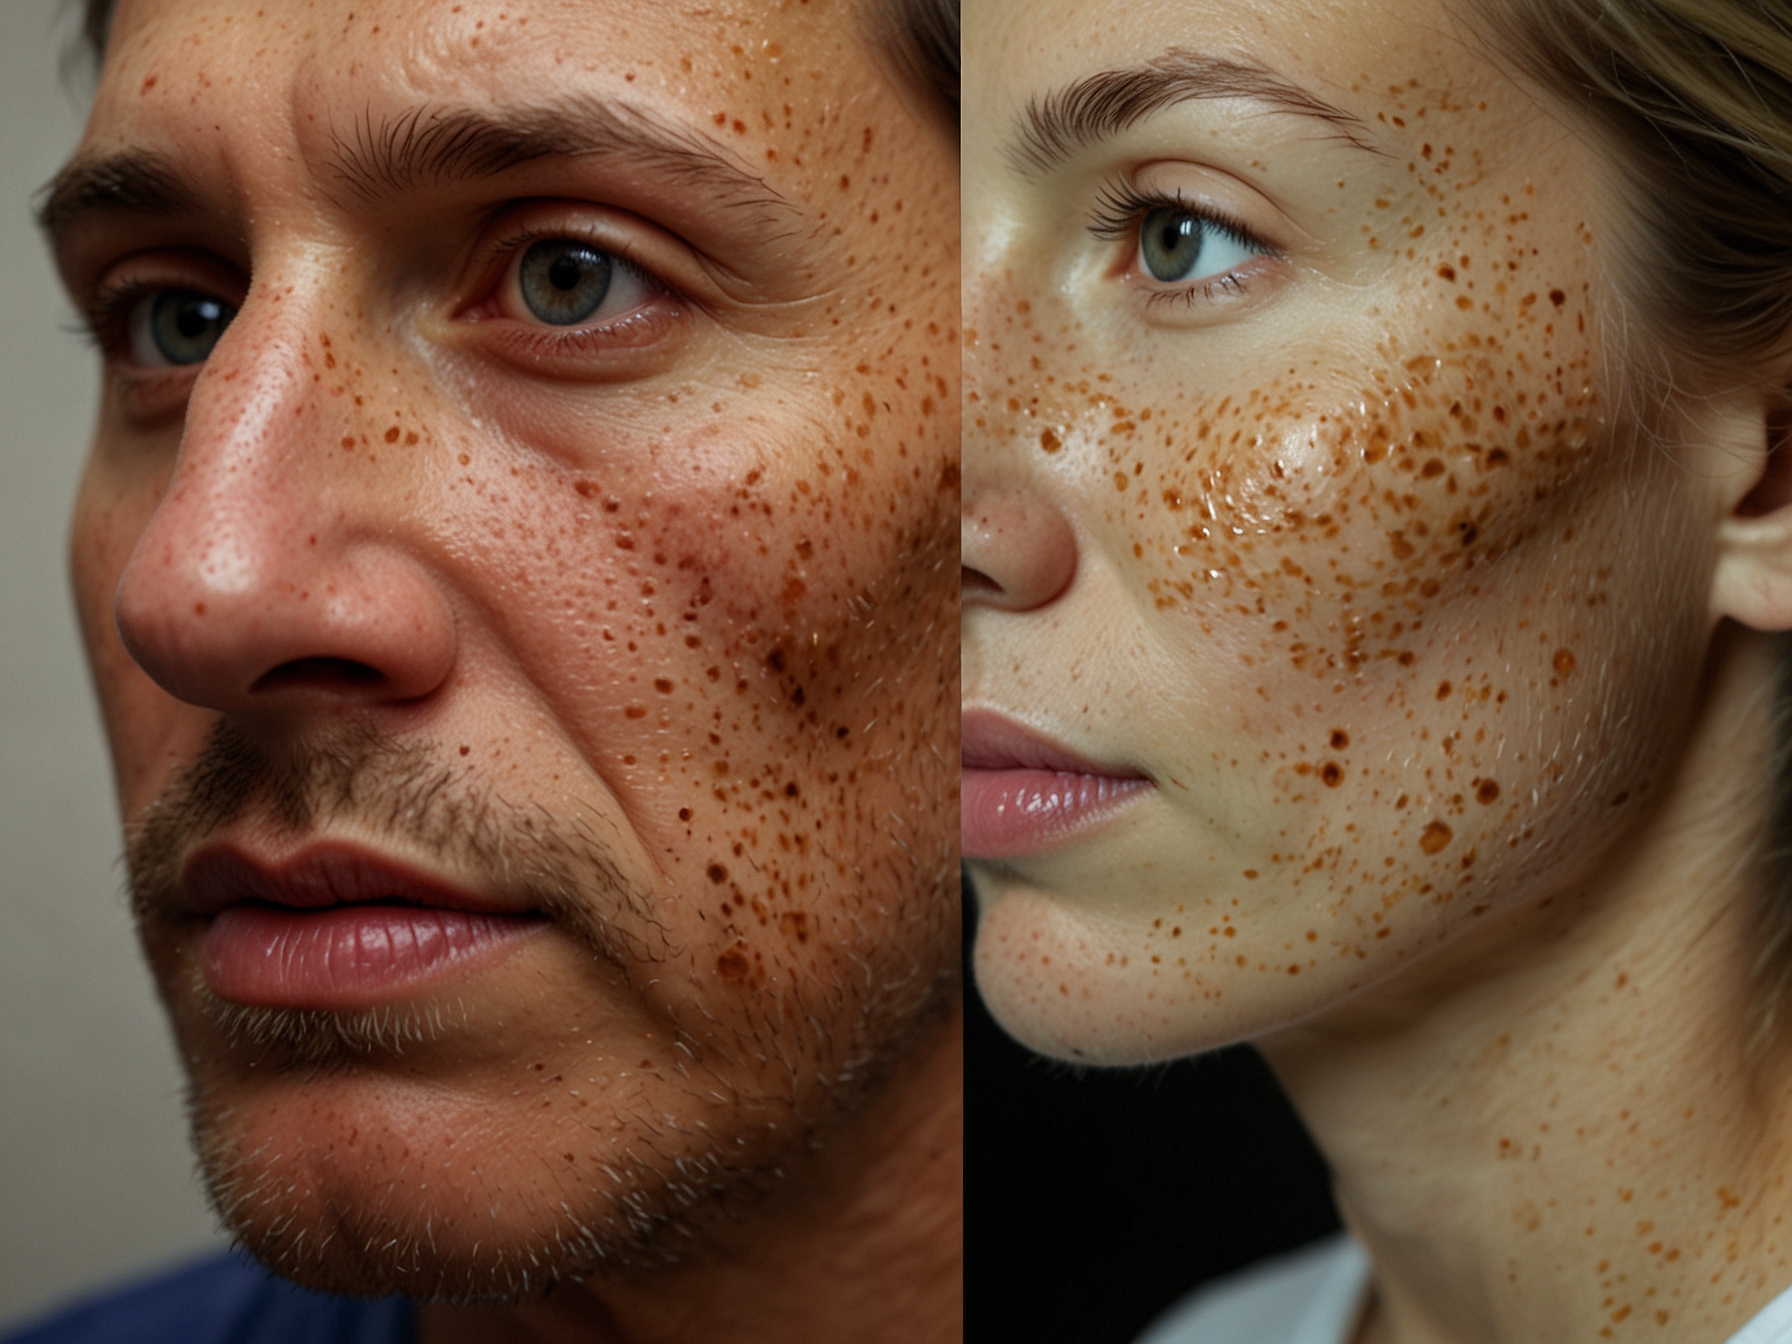 A close-up of skin cancer before and after treatment, demonstrating the significance of early detection and proper medical intervention, as discussed by Dave Portnoy.